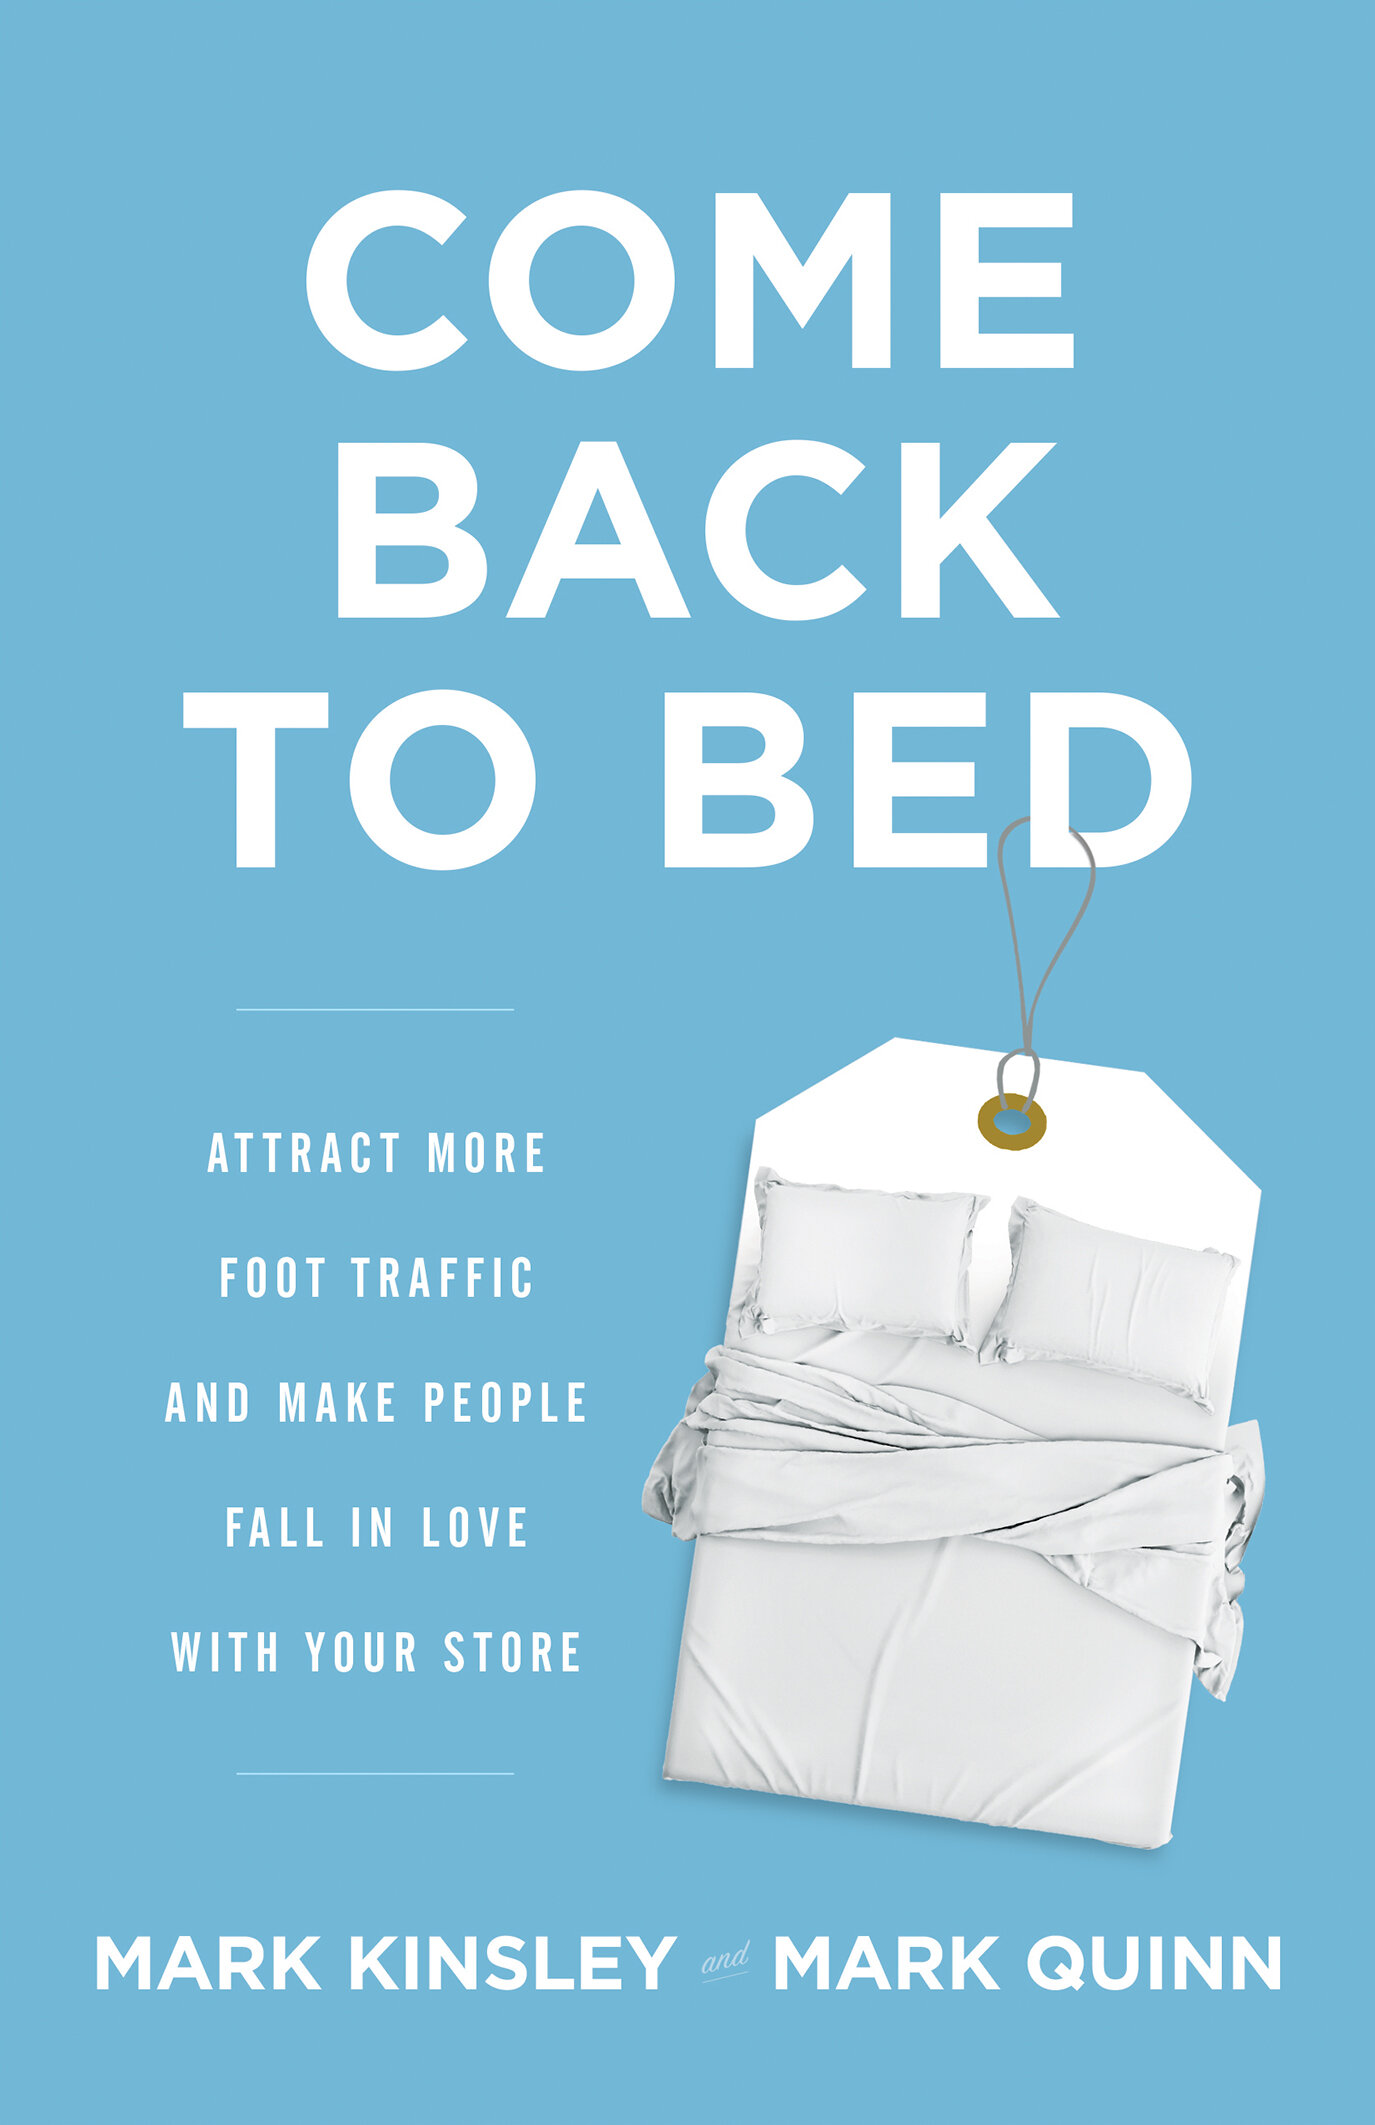 Book Cover - Come Back to Bed.jpg